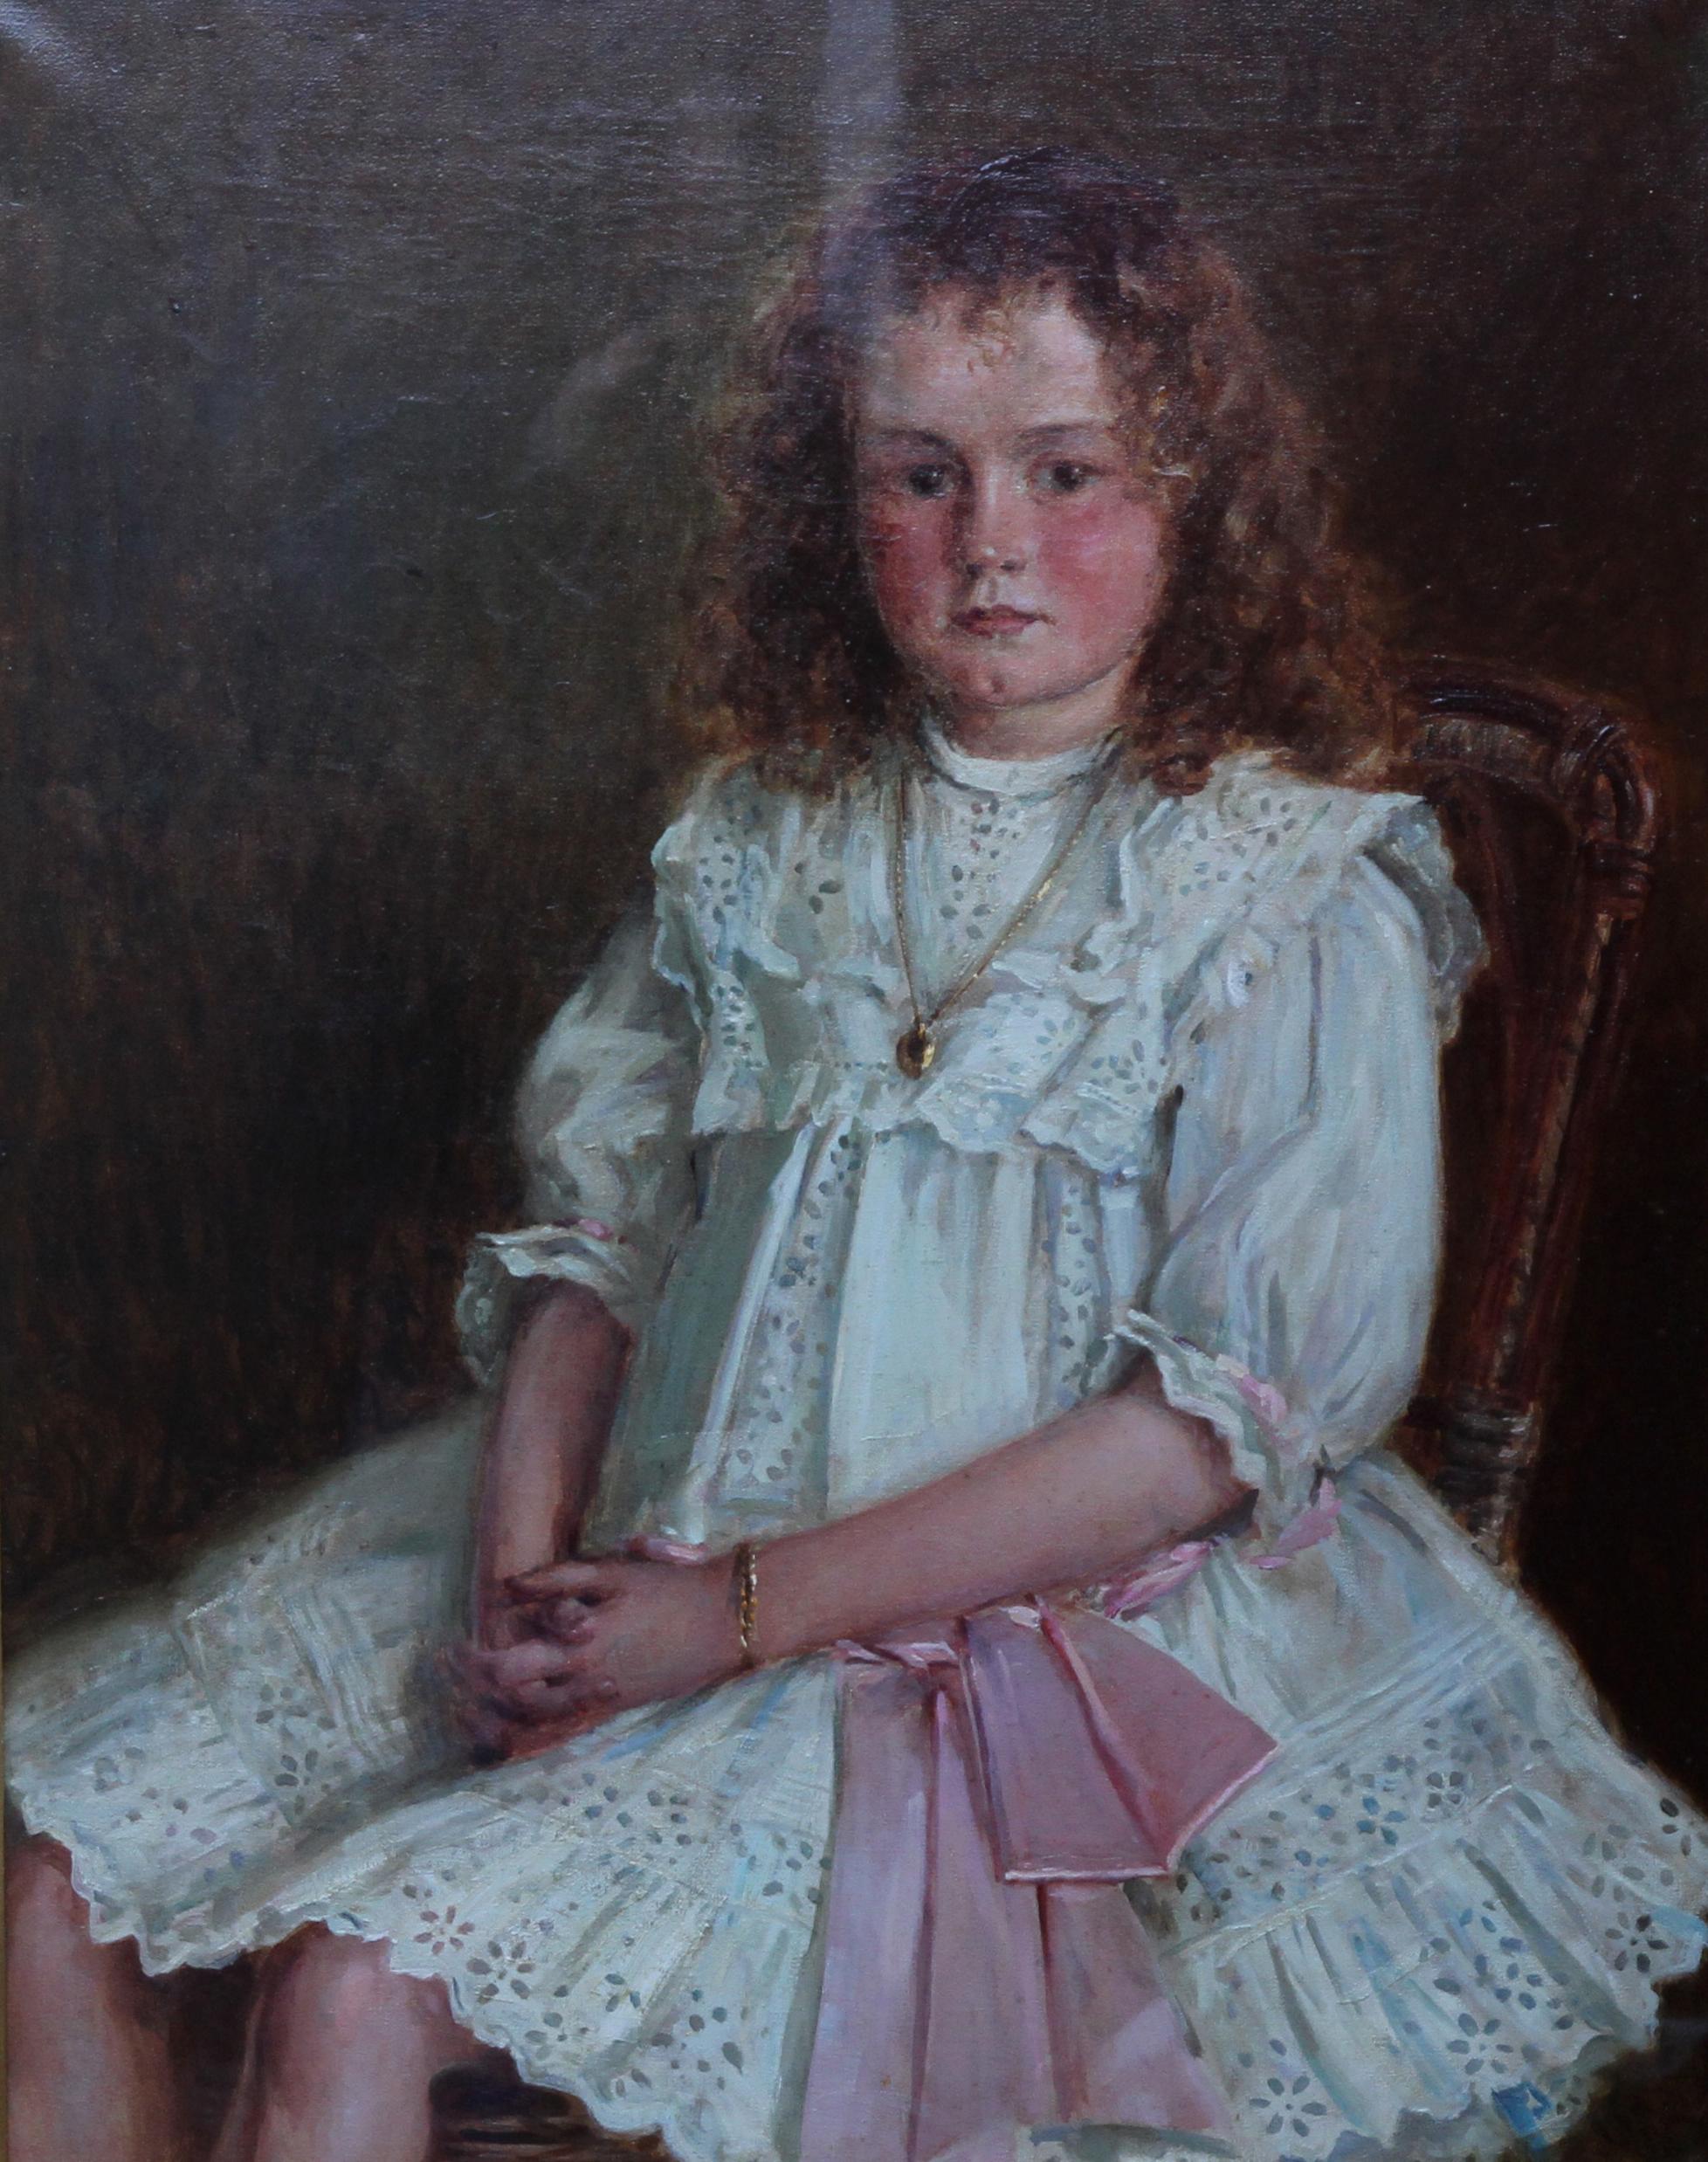 Portrait of a Young Welsh Girl - Enid Richards - British Edwardian Staithes art - Painting by Ernest Higgins Rigg